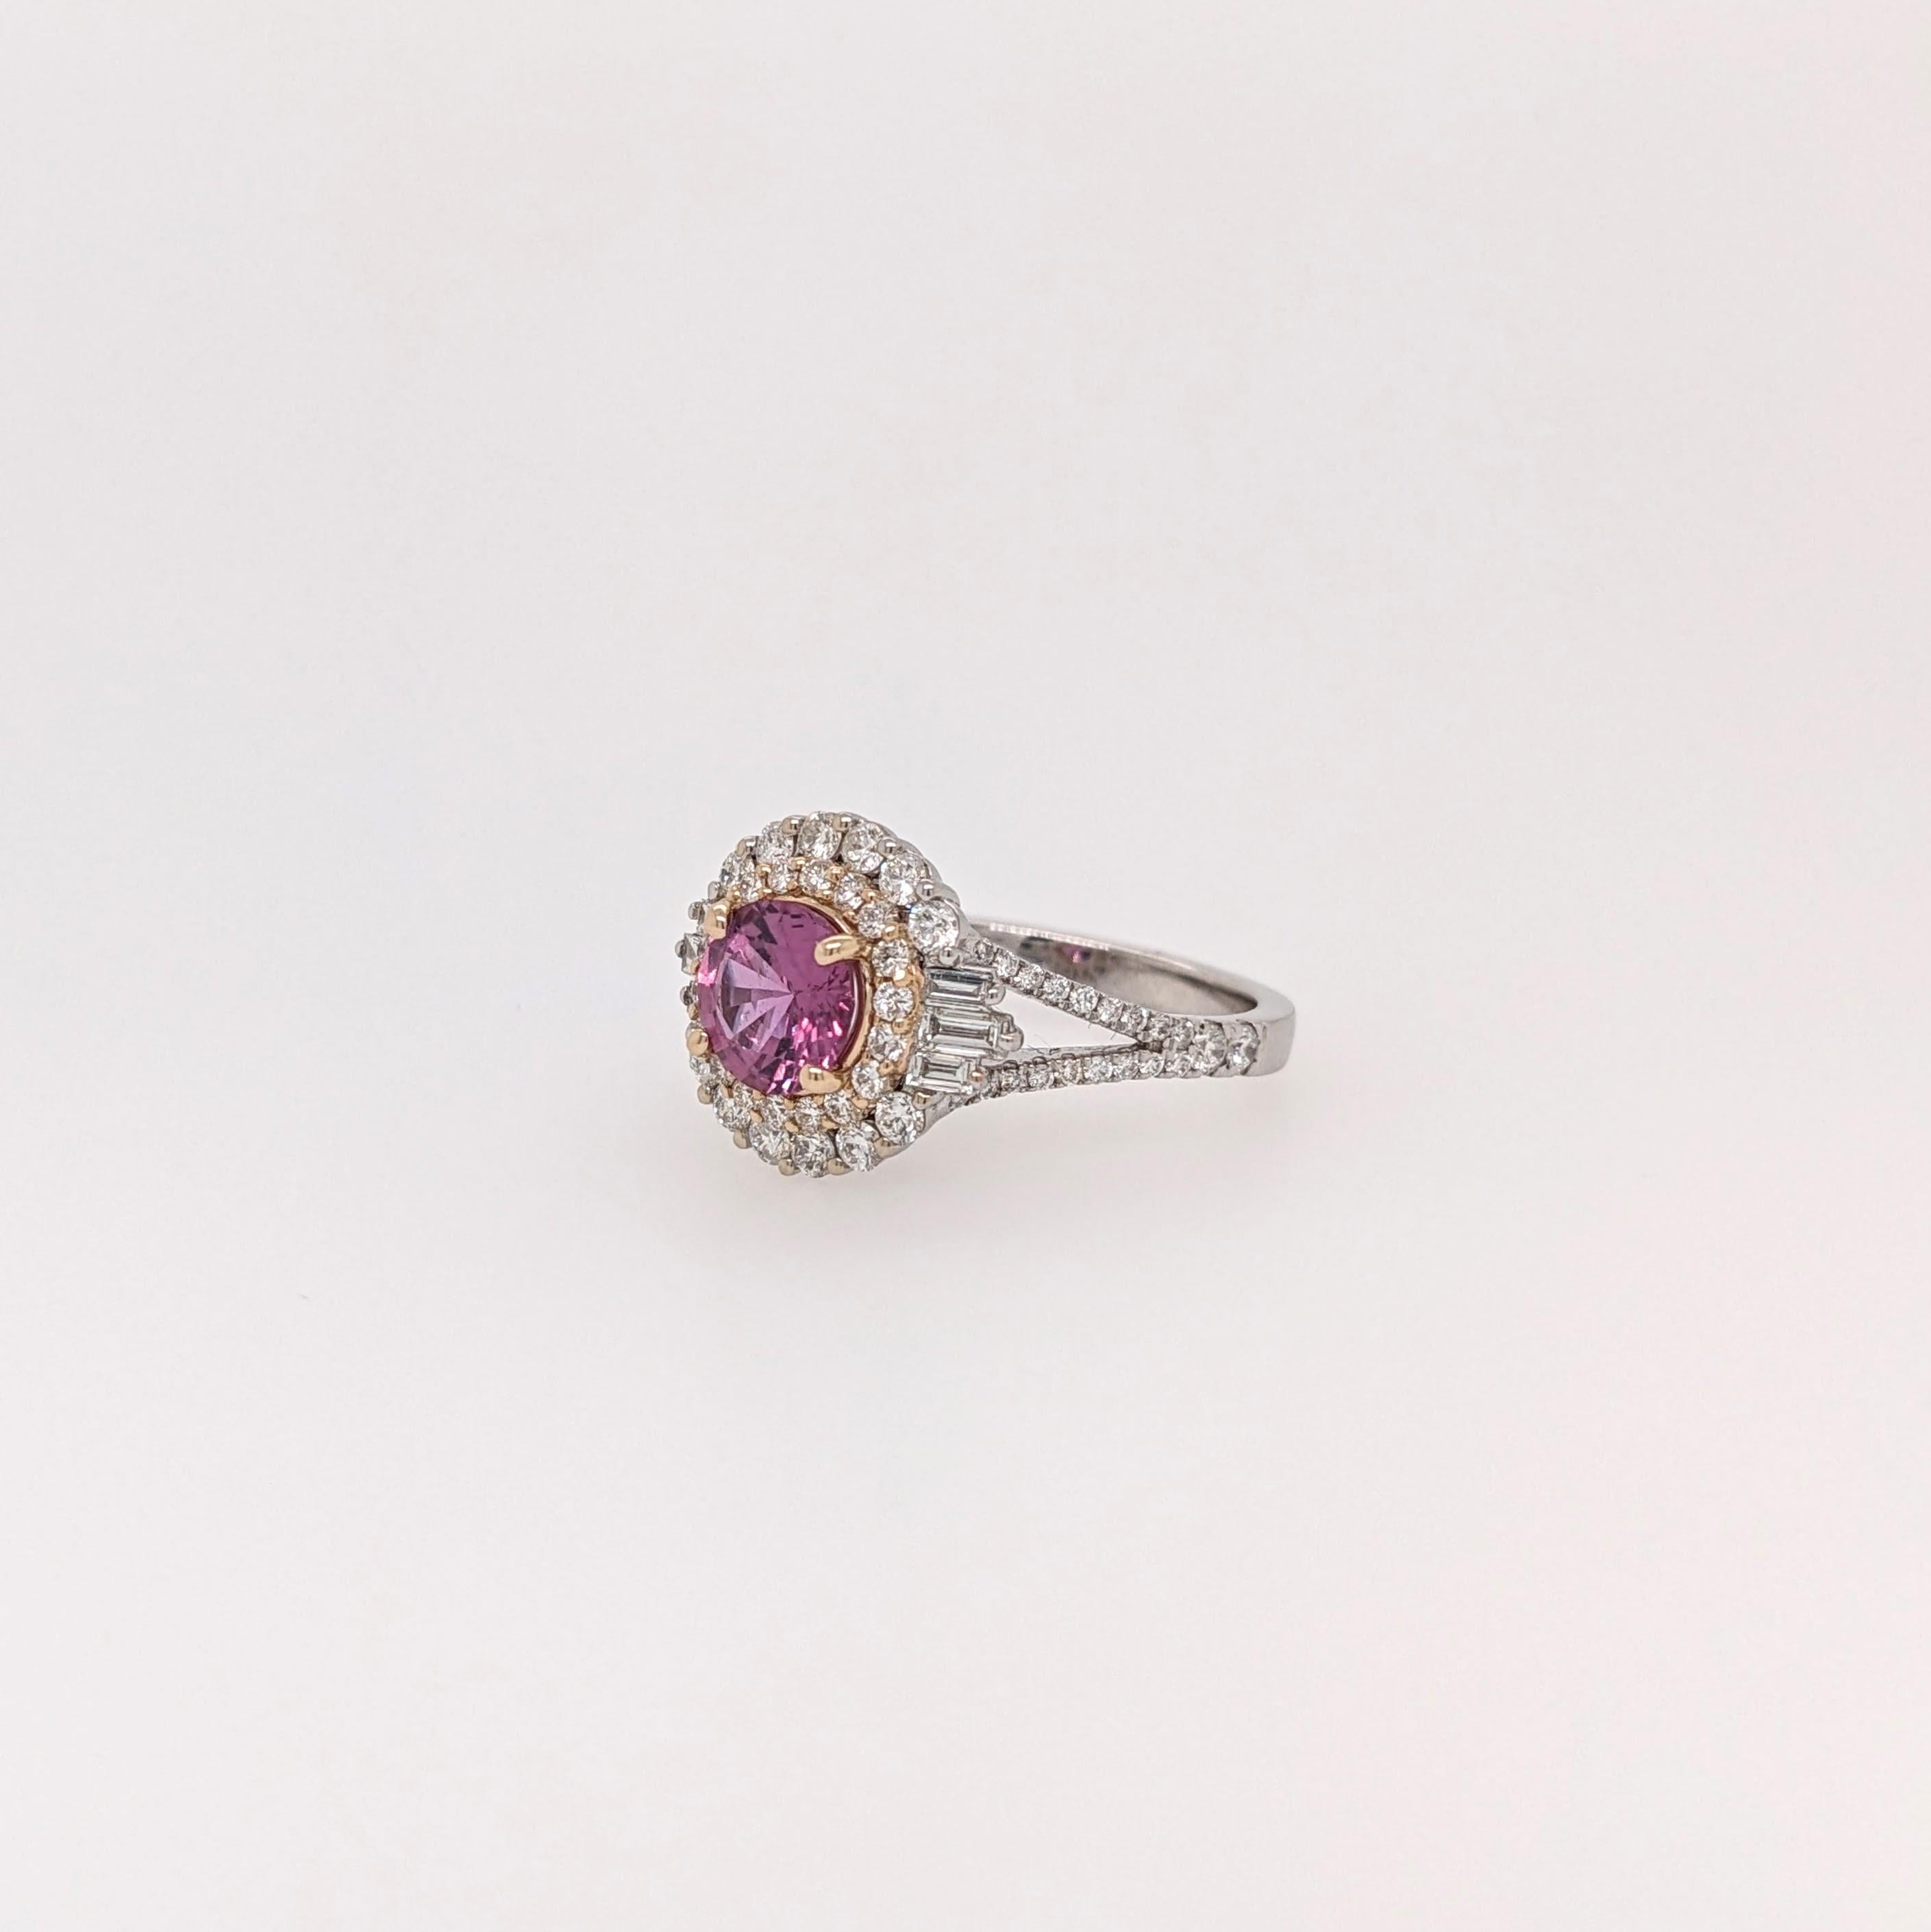 This pink sapphire ring is perfect for the modern bride! With a split band you can ensure that this ring will be worn safely and securely throughout the day and night.

Fun Fact: Sapphire is the birthstone for September :)

~~~~~

Item Type: